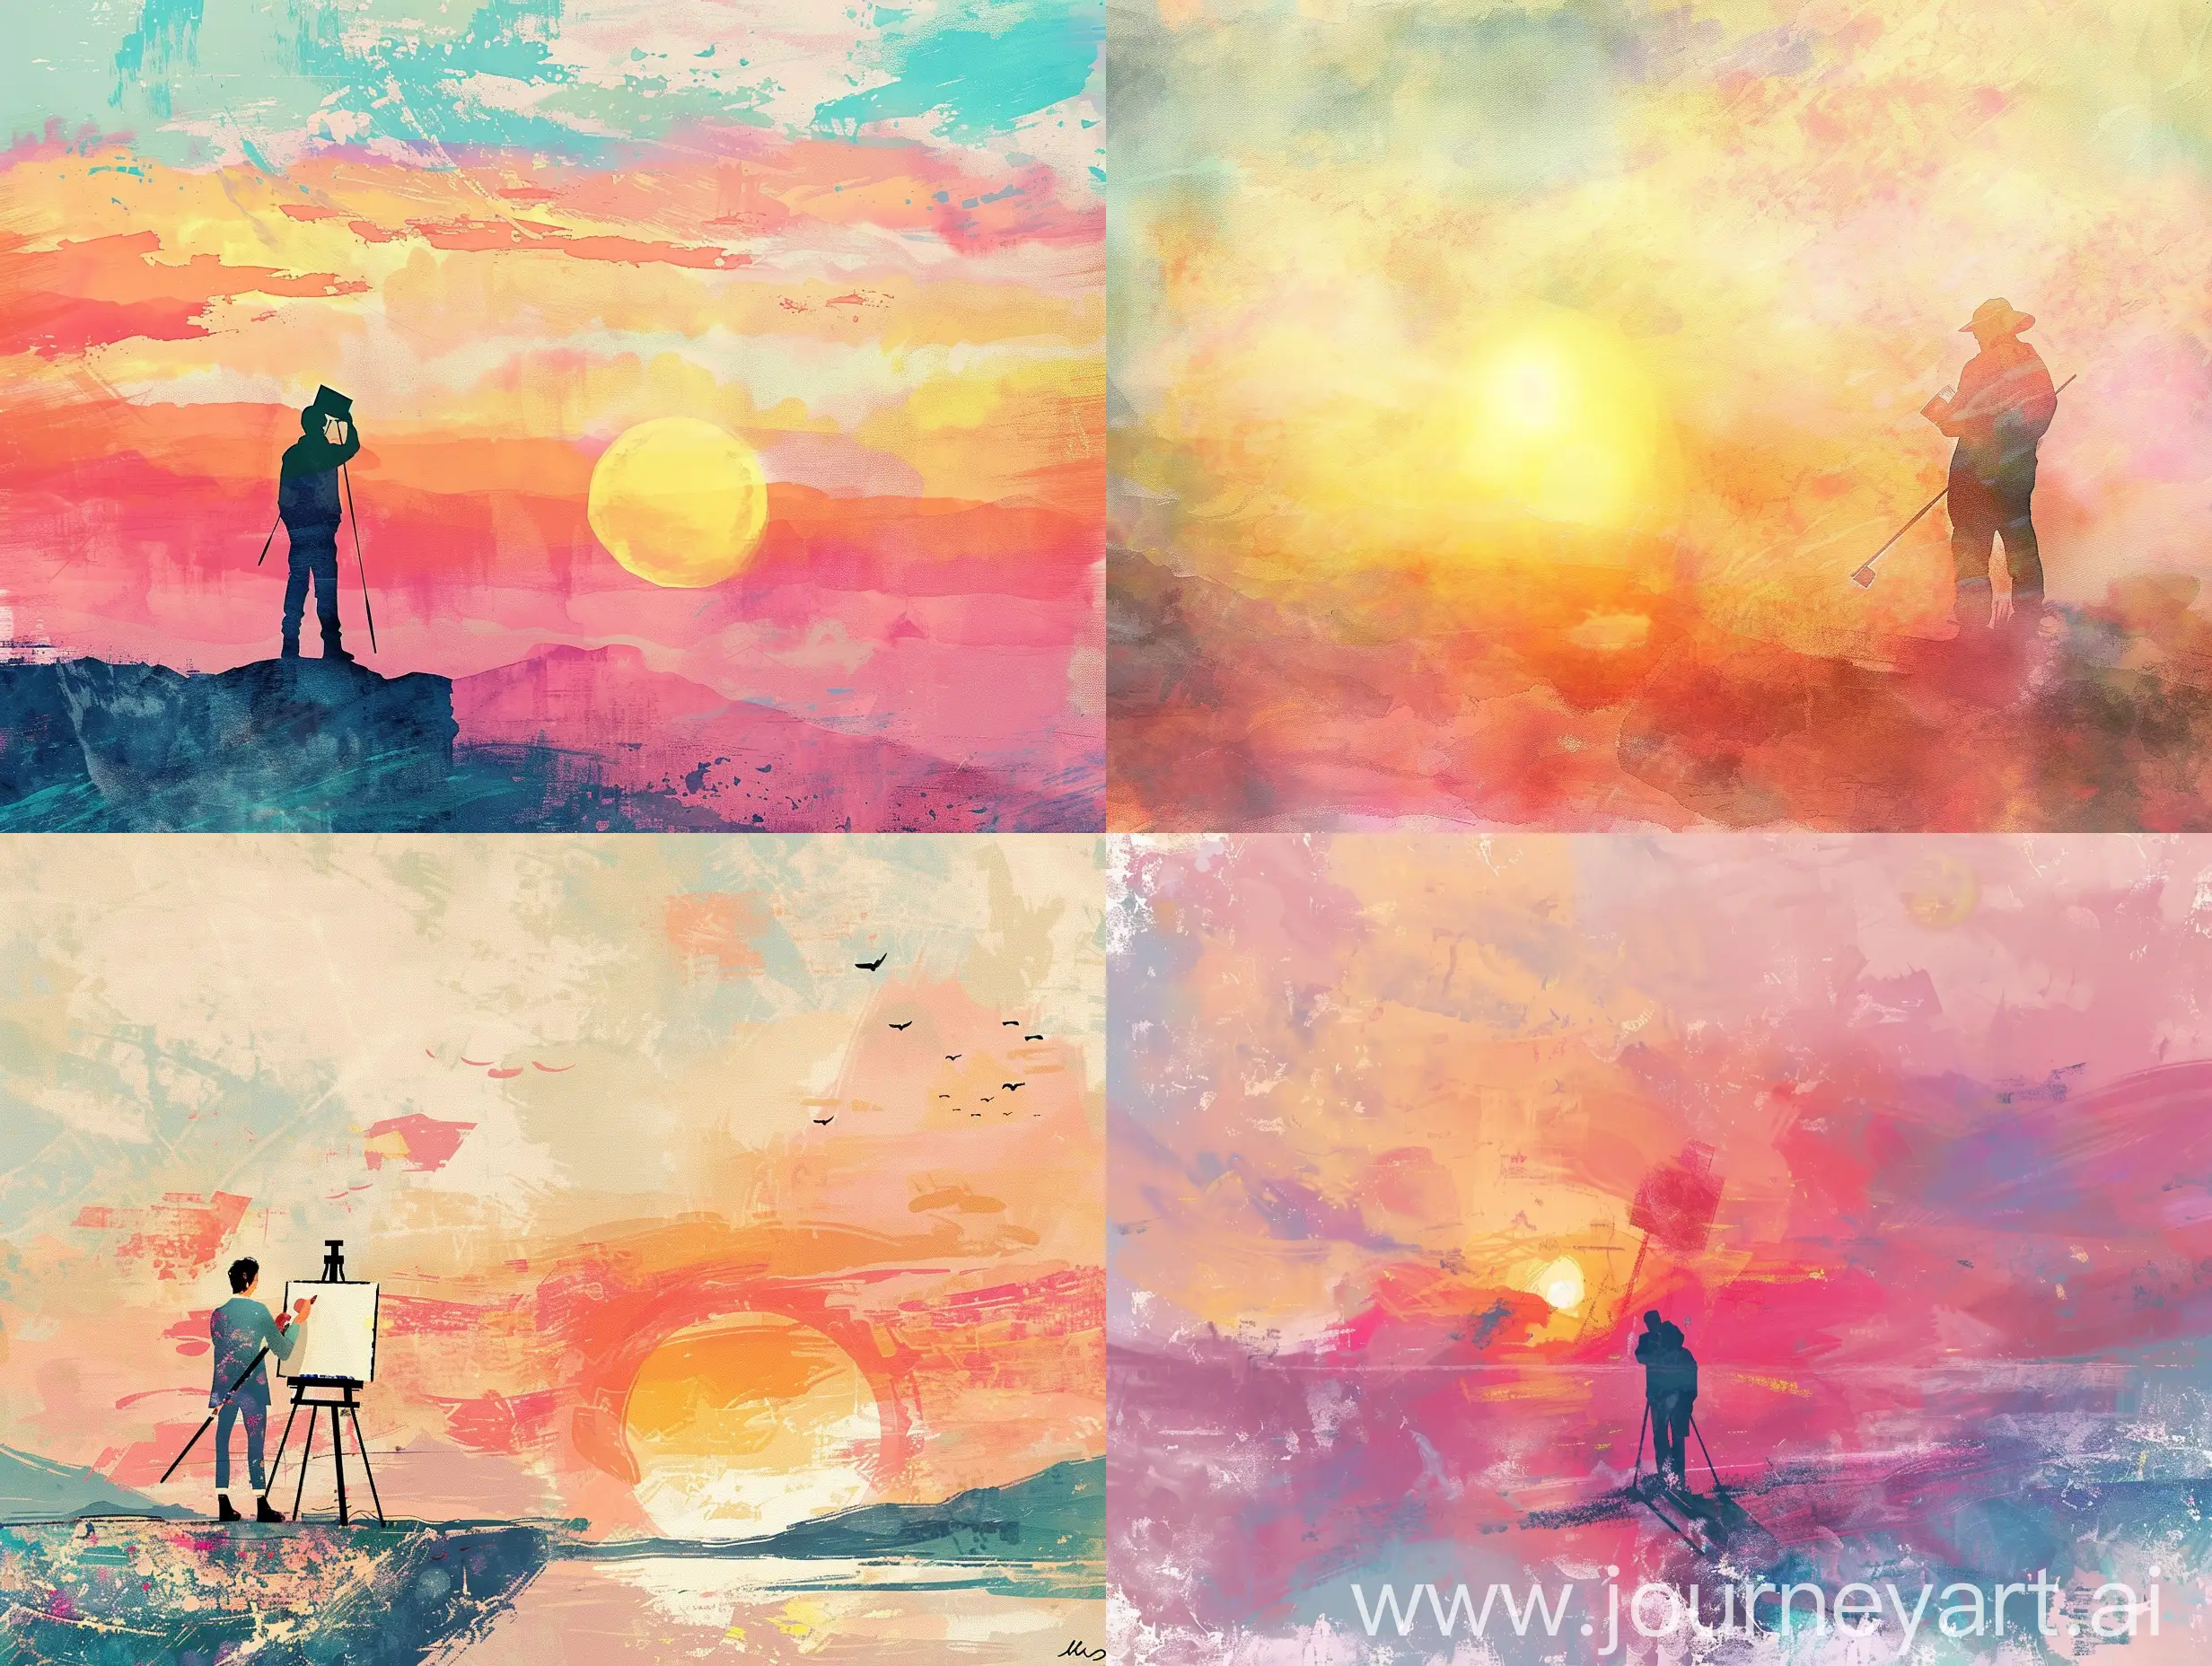 Contemporary-Digital-Illustration-Sunset-Painter-in-Pastel-Watercolor